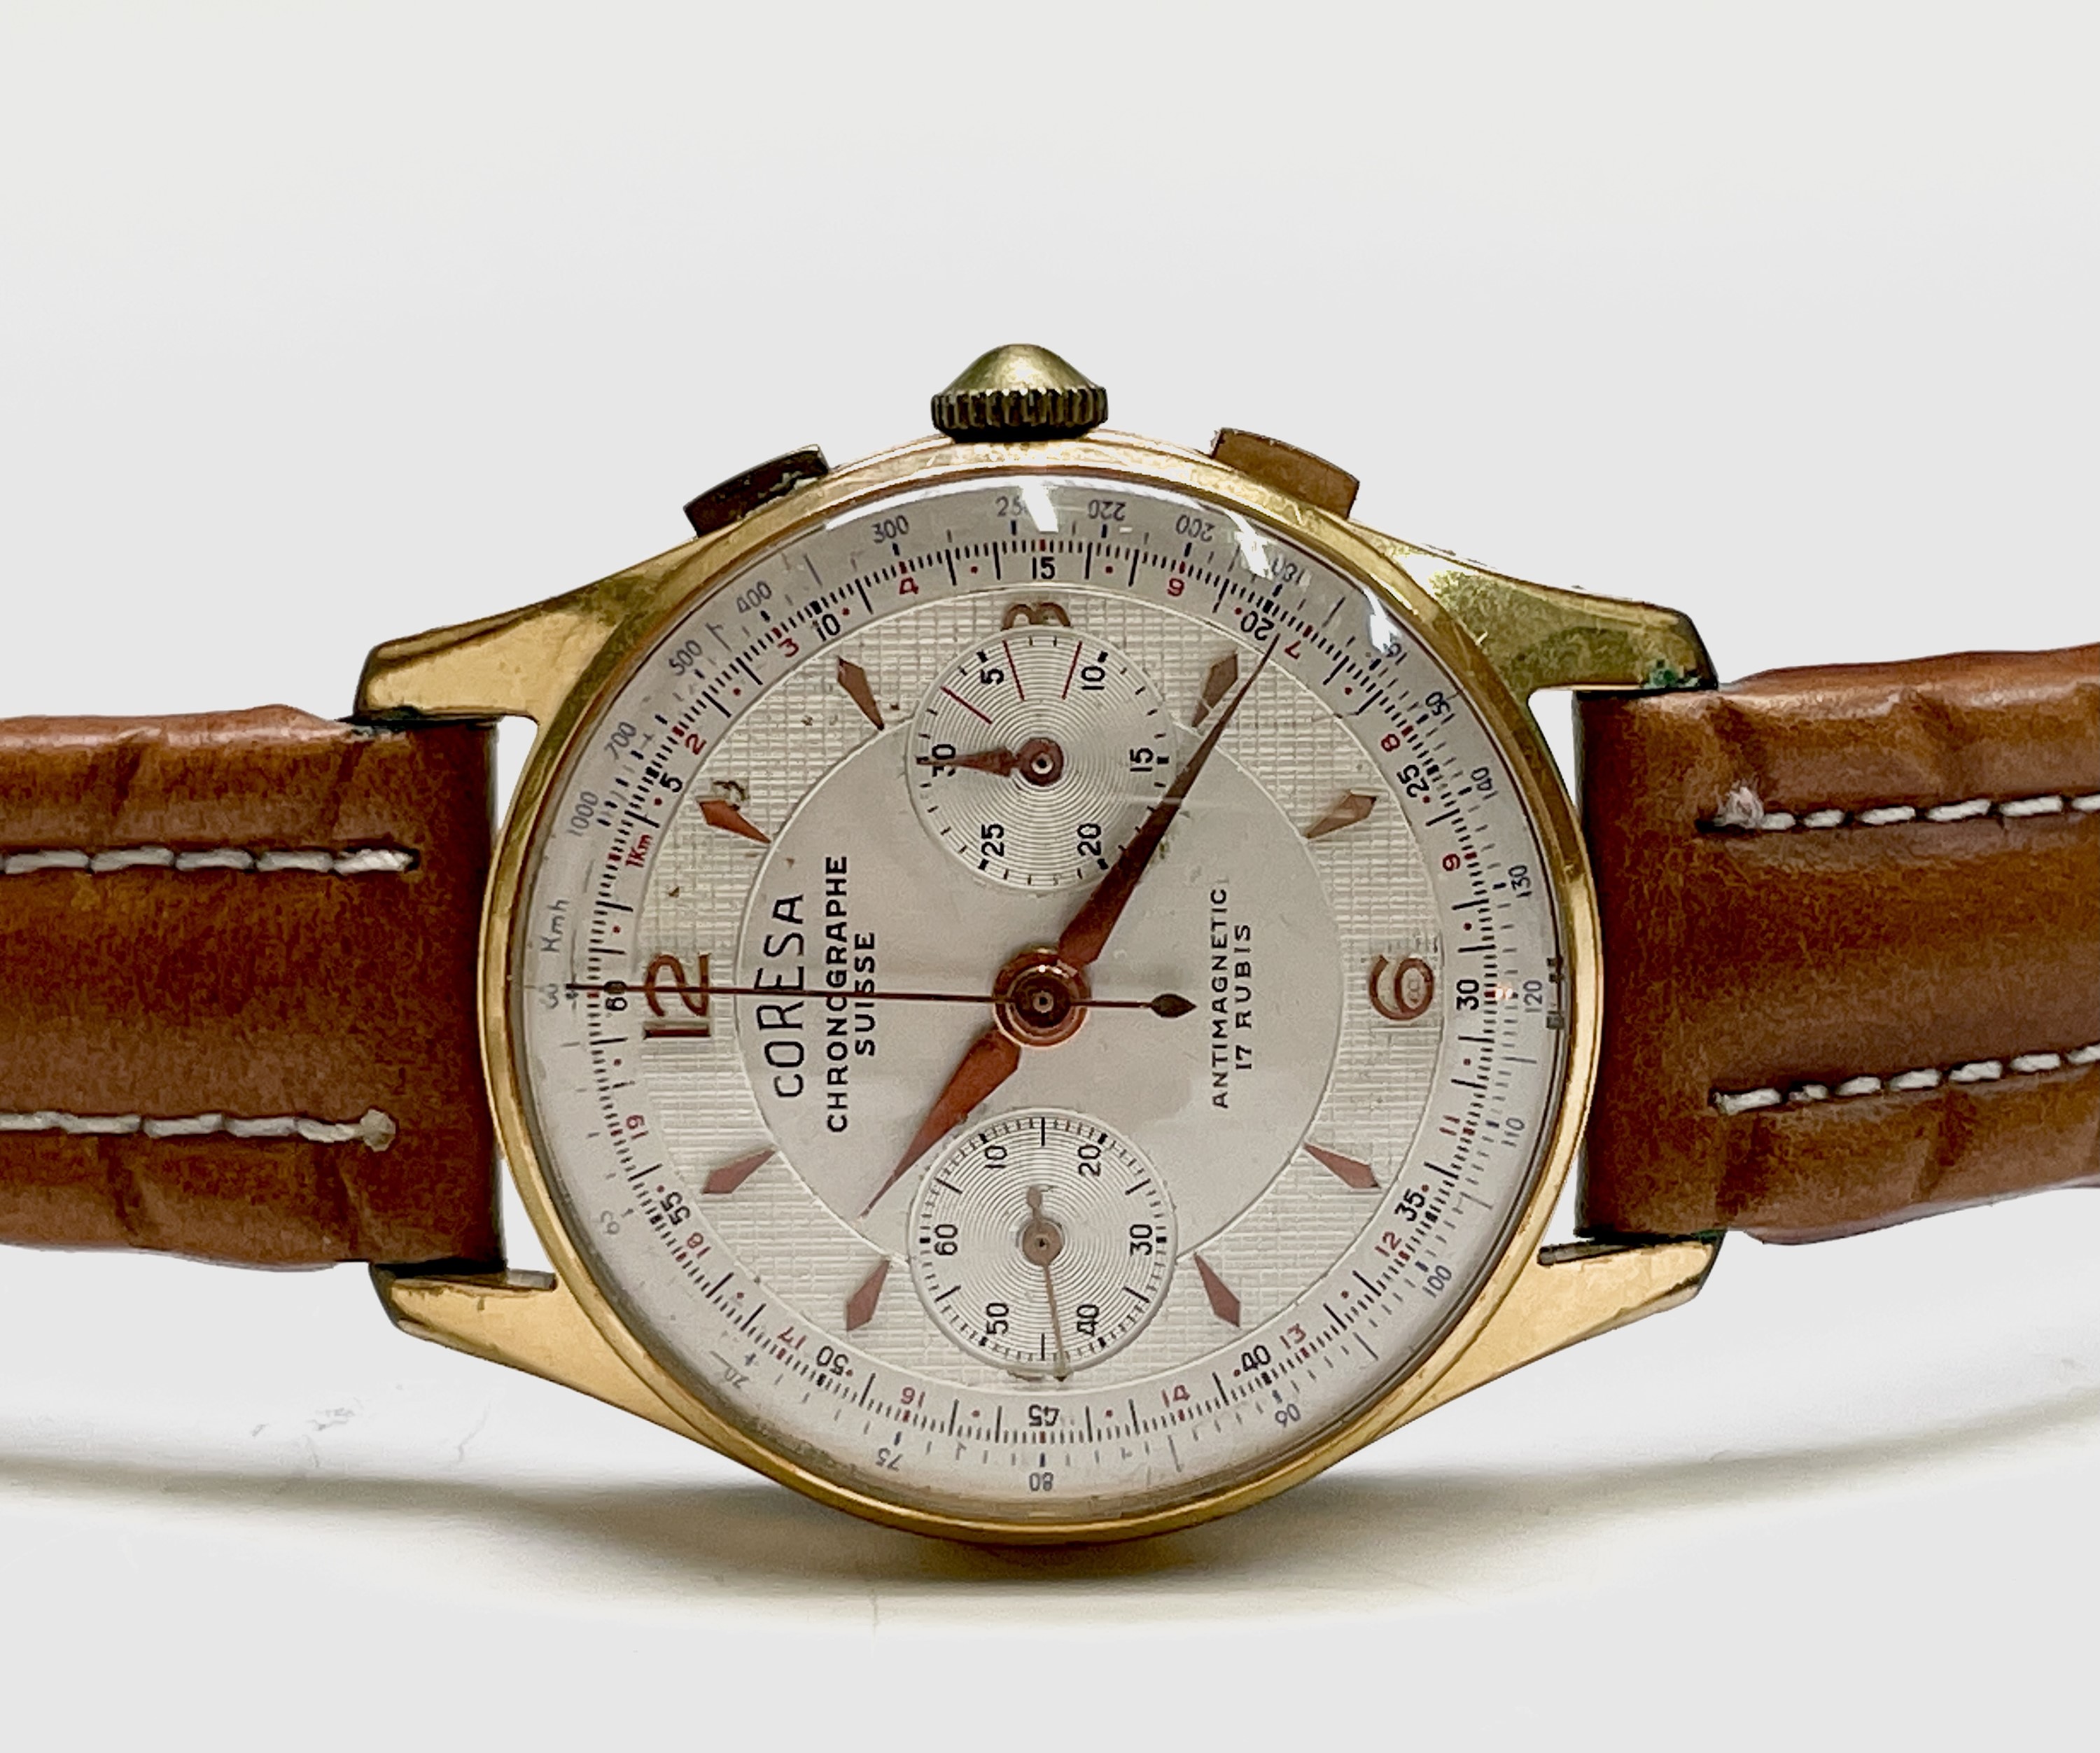 A Coresa gold plated chronograph wristwatch 36.8mm diameter 47.8gm including strap. Phillip